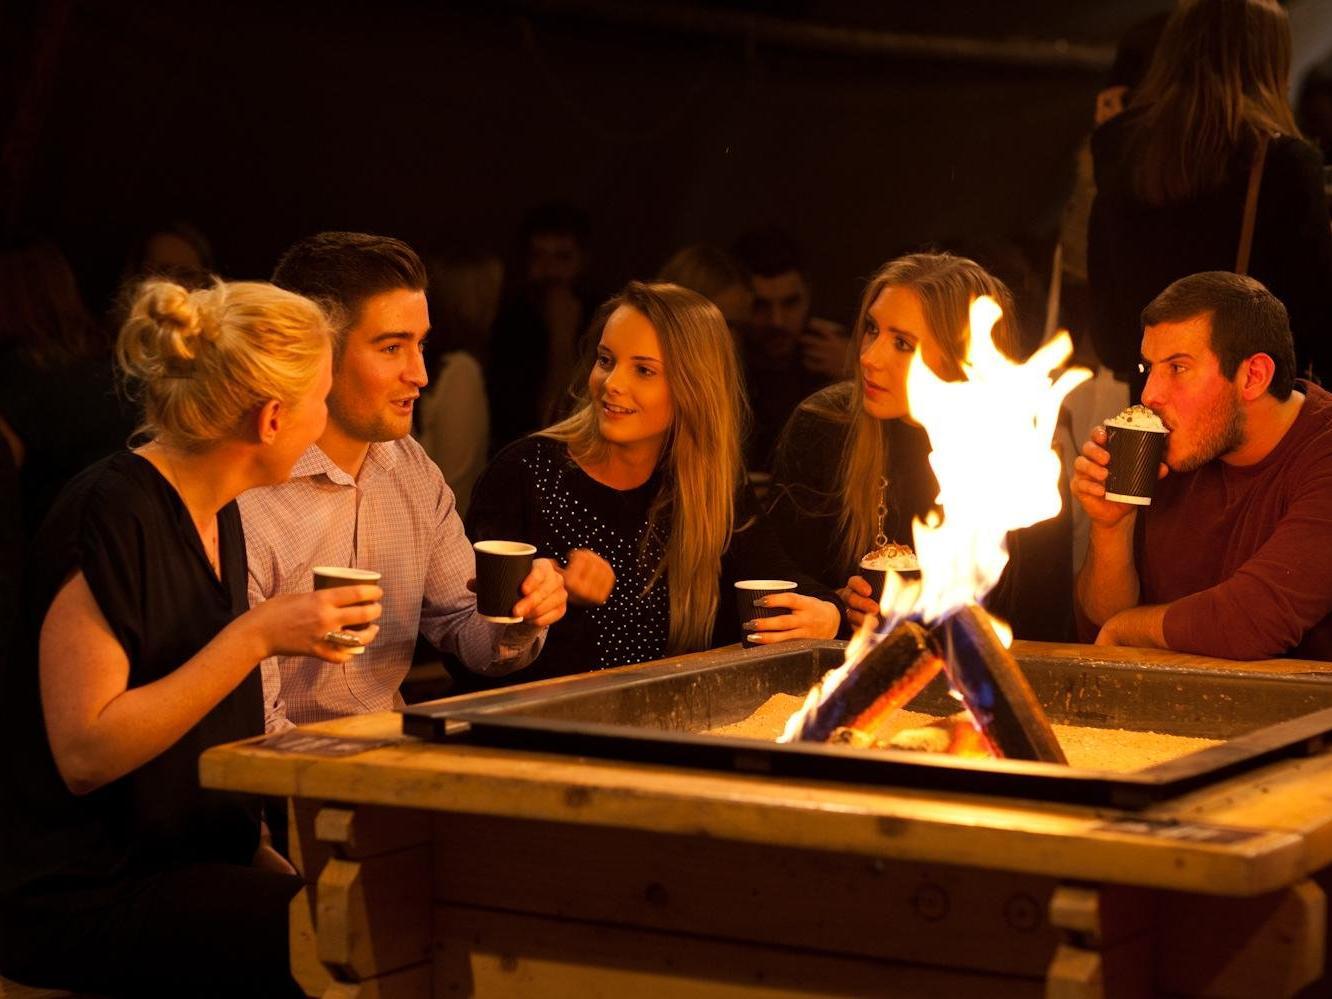 The popular Viking-style experience can be found just outside Leeds Art Gallery on The Headrow. With a pop-up bar decked out with wooden tables and benches and drinks galore , its a good spot to warm up.